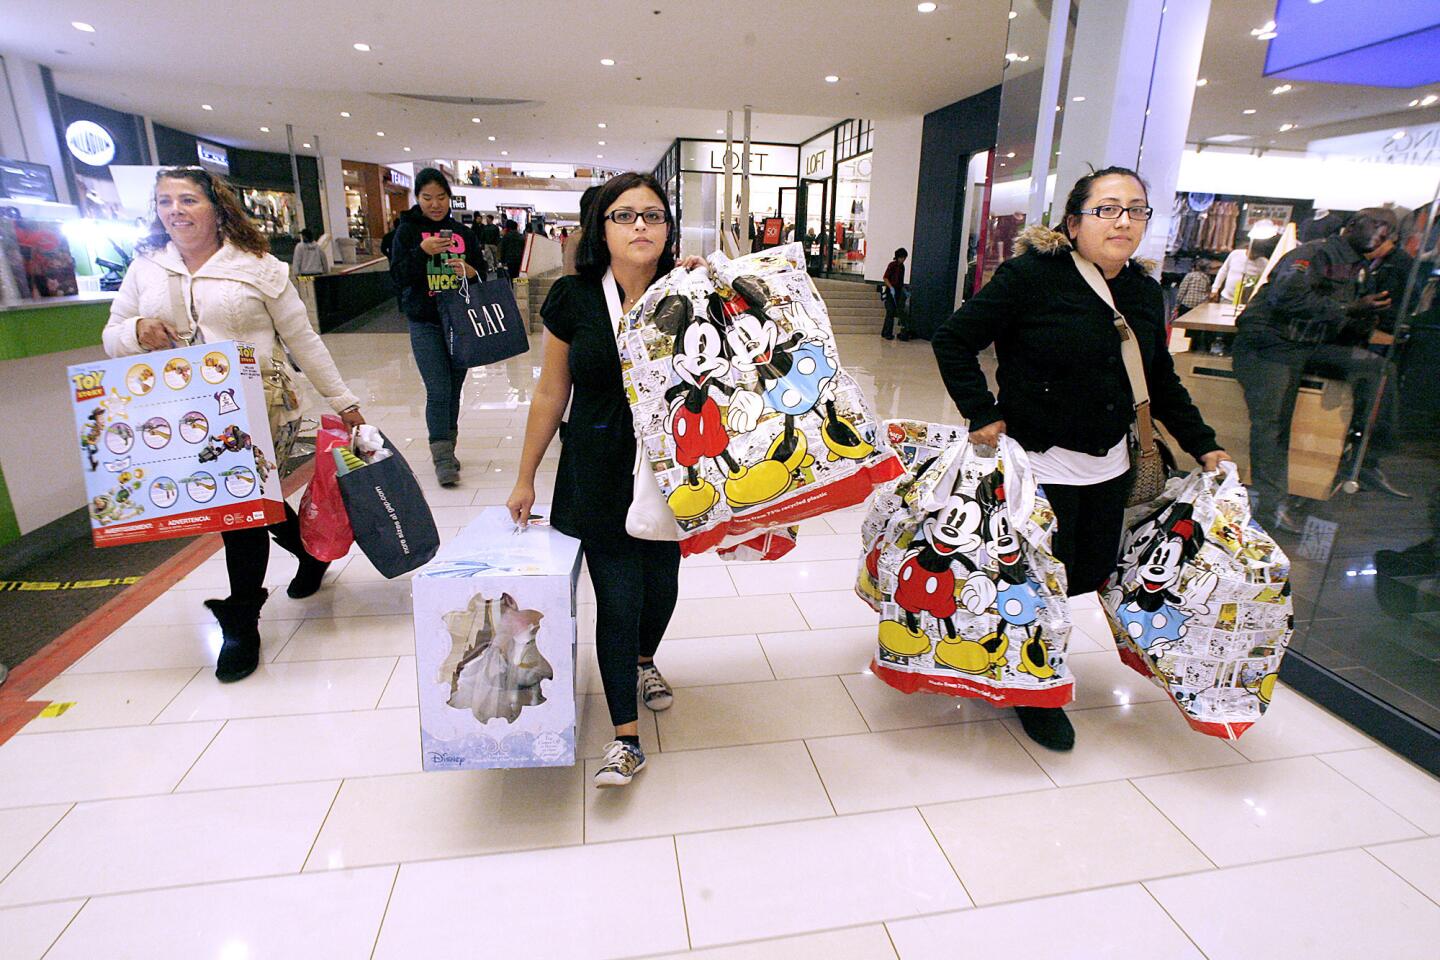 From left, Maria Quintero, of Glendale, Lisette Uribe of Glendale and Elsy Quintero of L.A., carry loads of bags from a shopping spree at the Glendale Galleria in Glendale on Black Friday, Nov. 23, 2012.